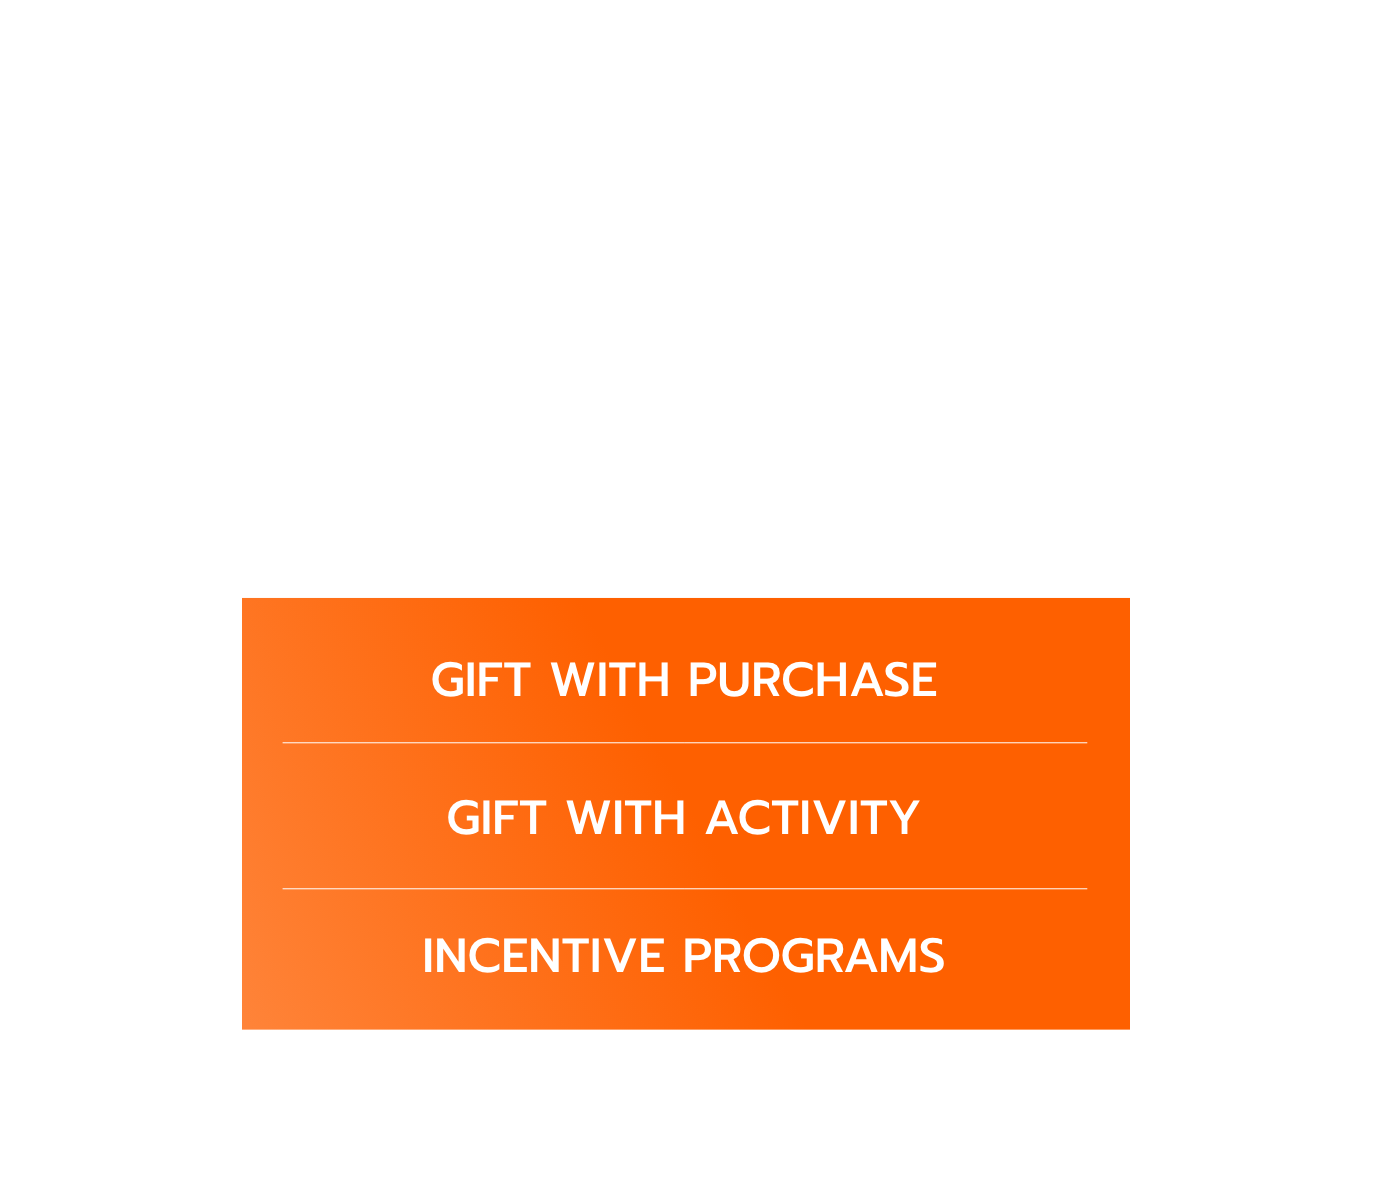 Select IT Ecommerce Automation - An eCommerce platform that is your ally in brand growth. Gift with purchase, gift with activity, incentive program - Get Started Today!